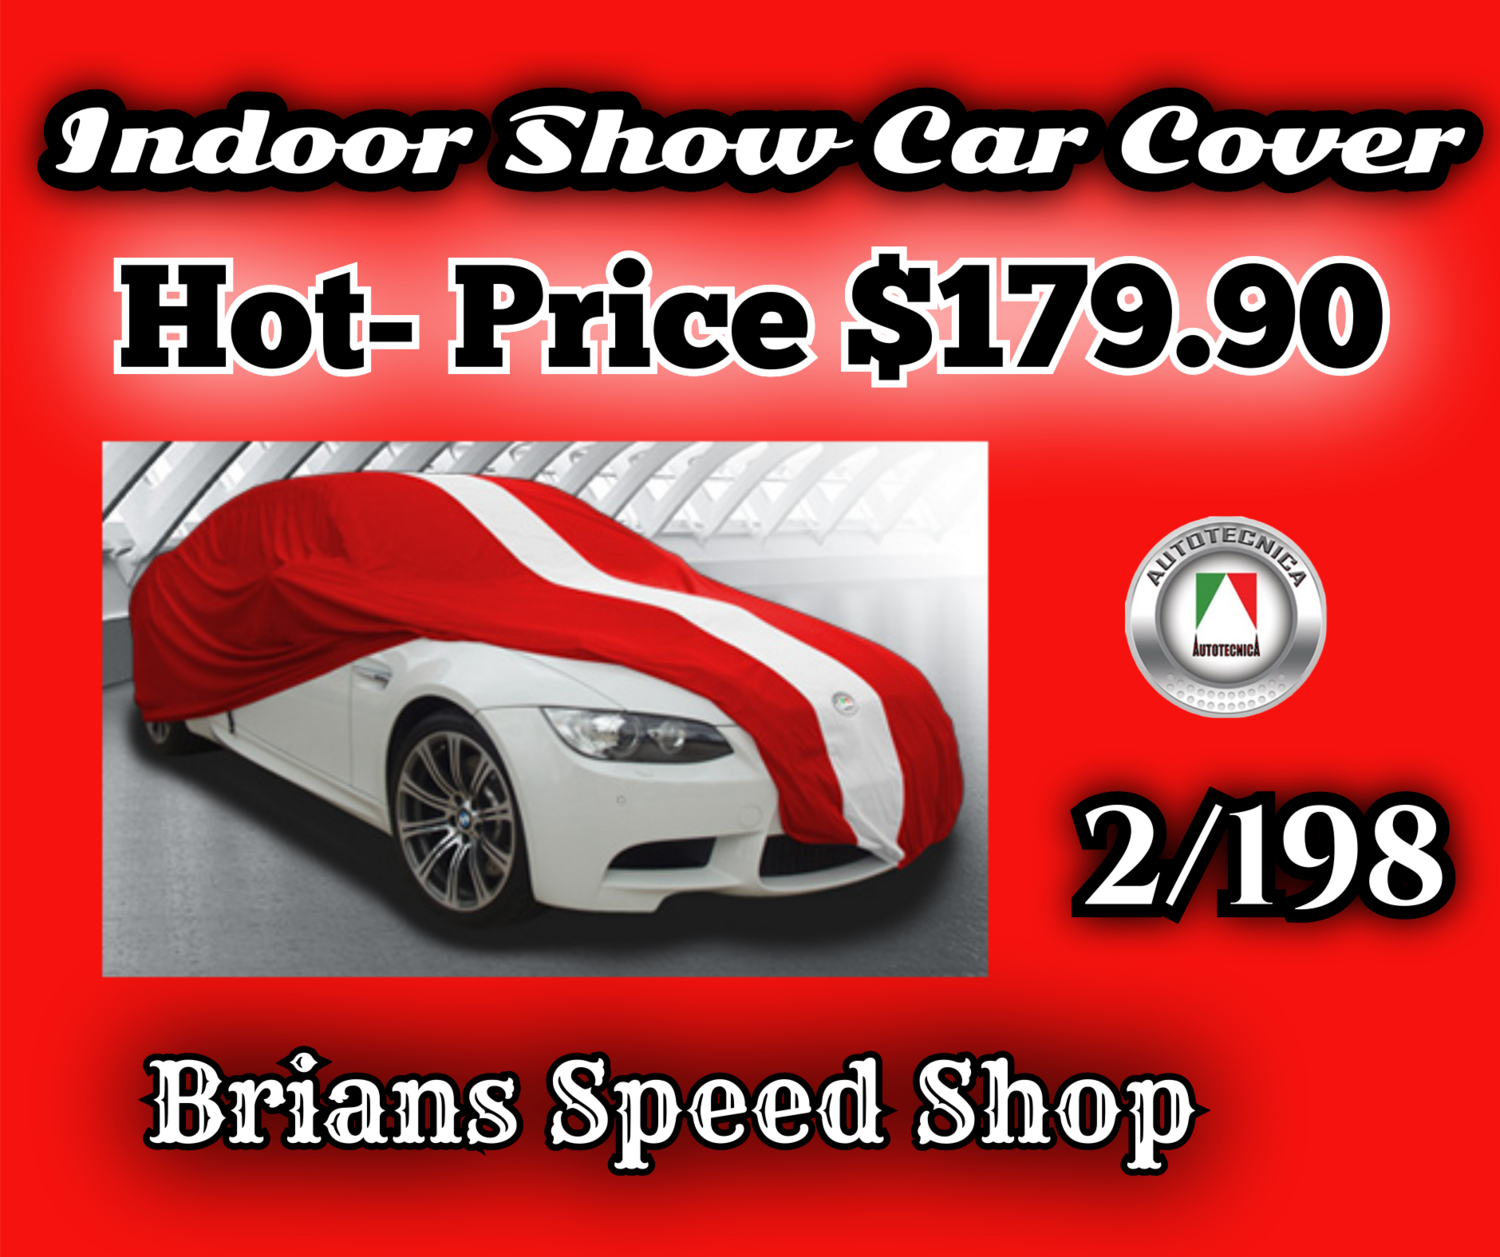 2/198 * RED Ultimate Protection Show Car Cover for indoor It has superior protection from dust and pollutants and is constructed with the most high quality non fad polyester stretchable fabric.$179.90